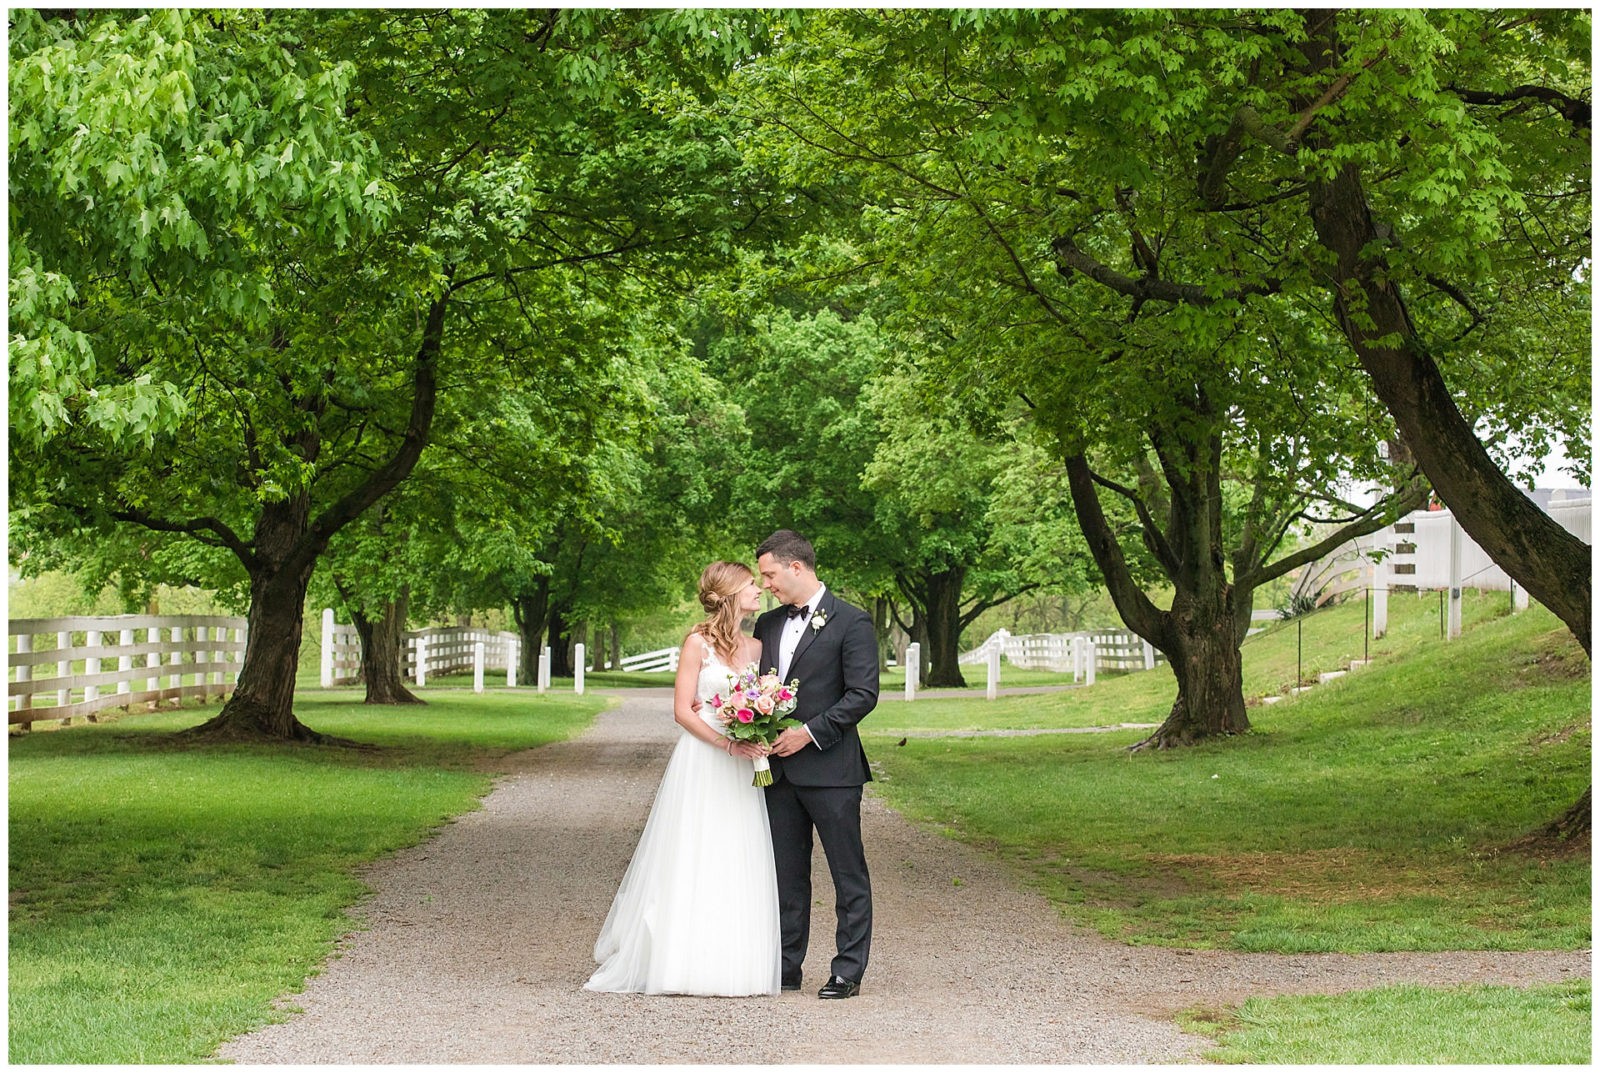 Bride and groom standing under a canopy of trees at Shaker Village in Harrodsburg, KY